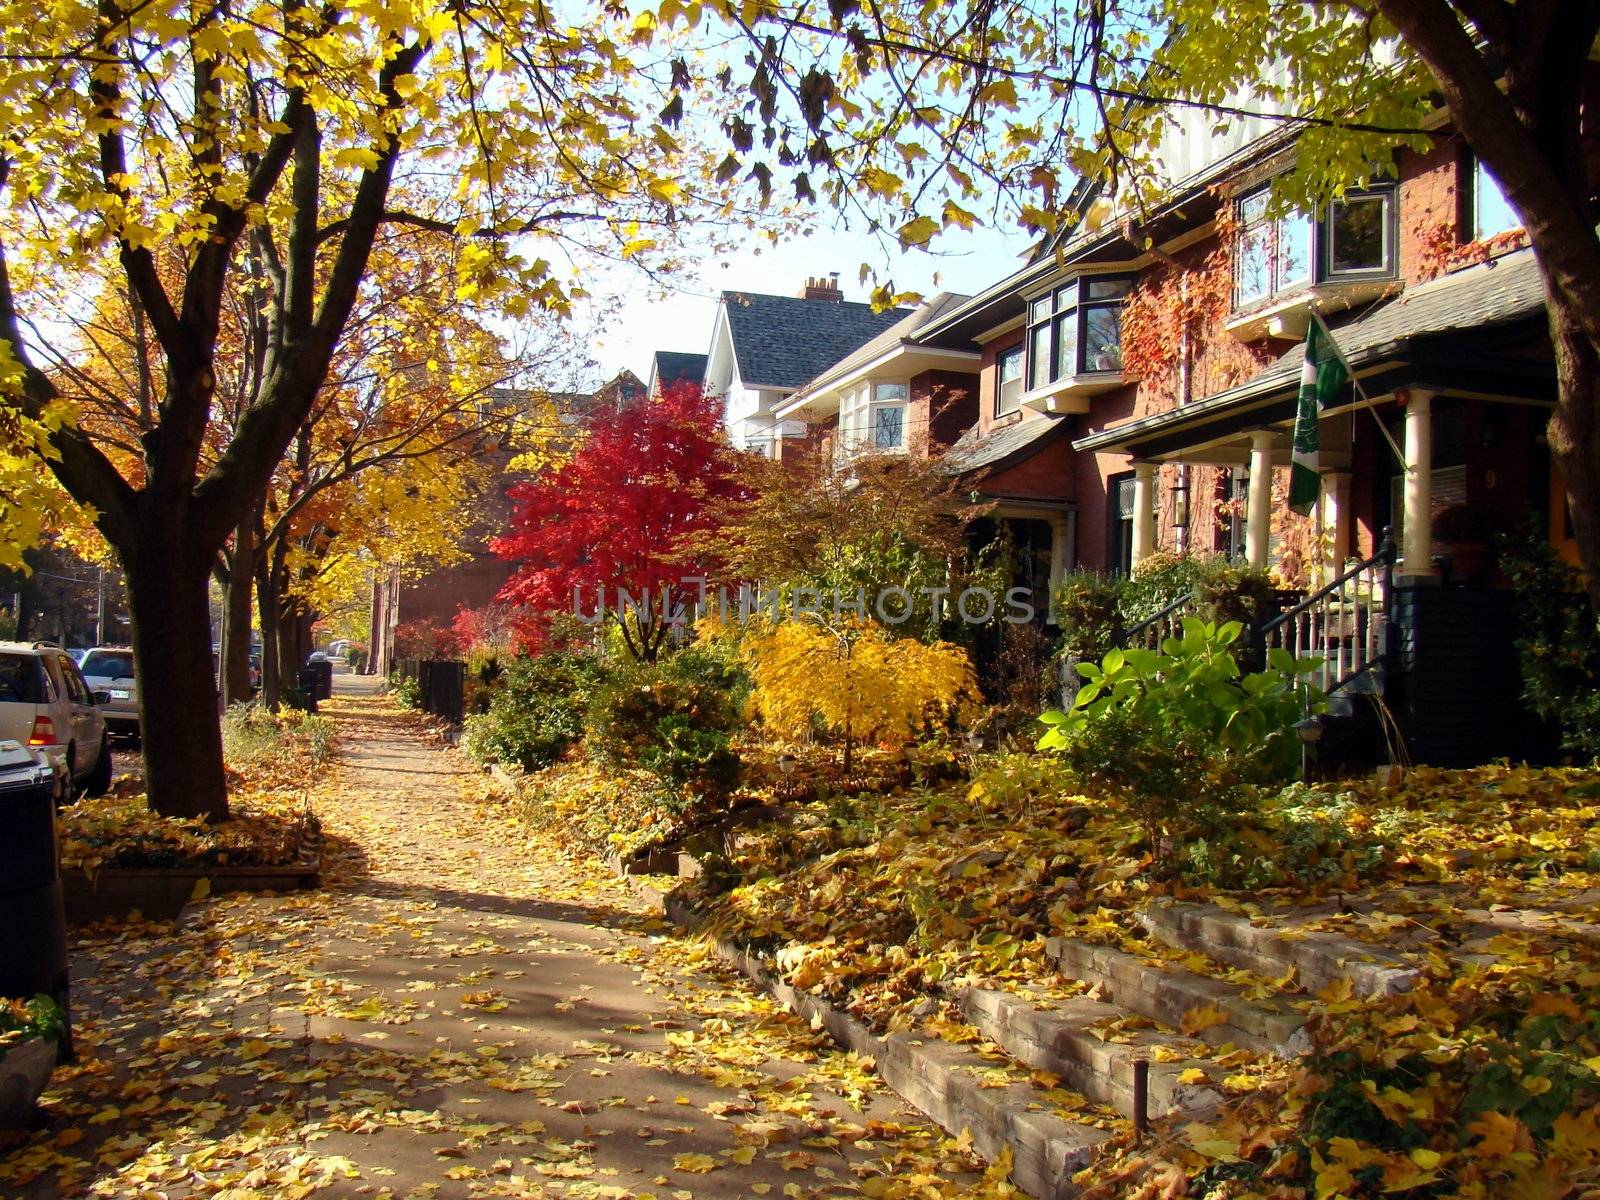 Autumn City SideWalk by hicster